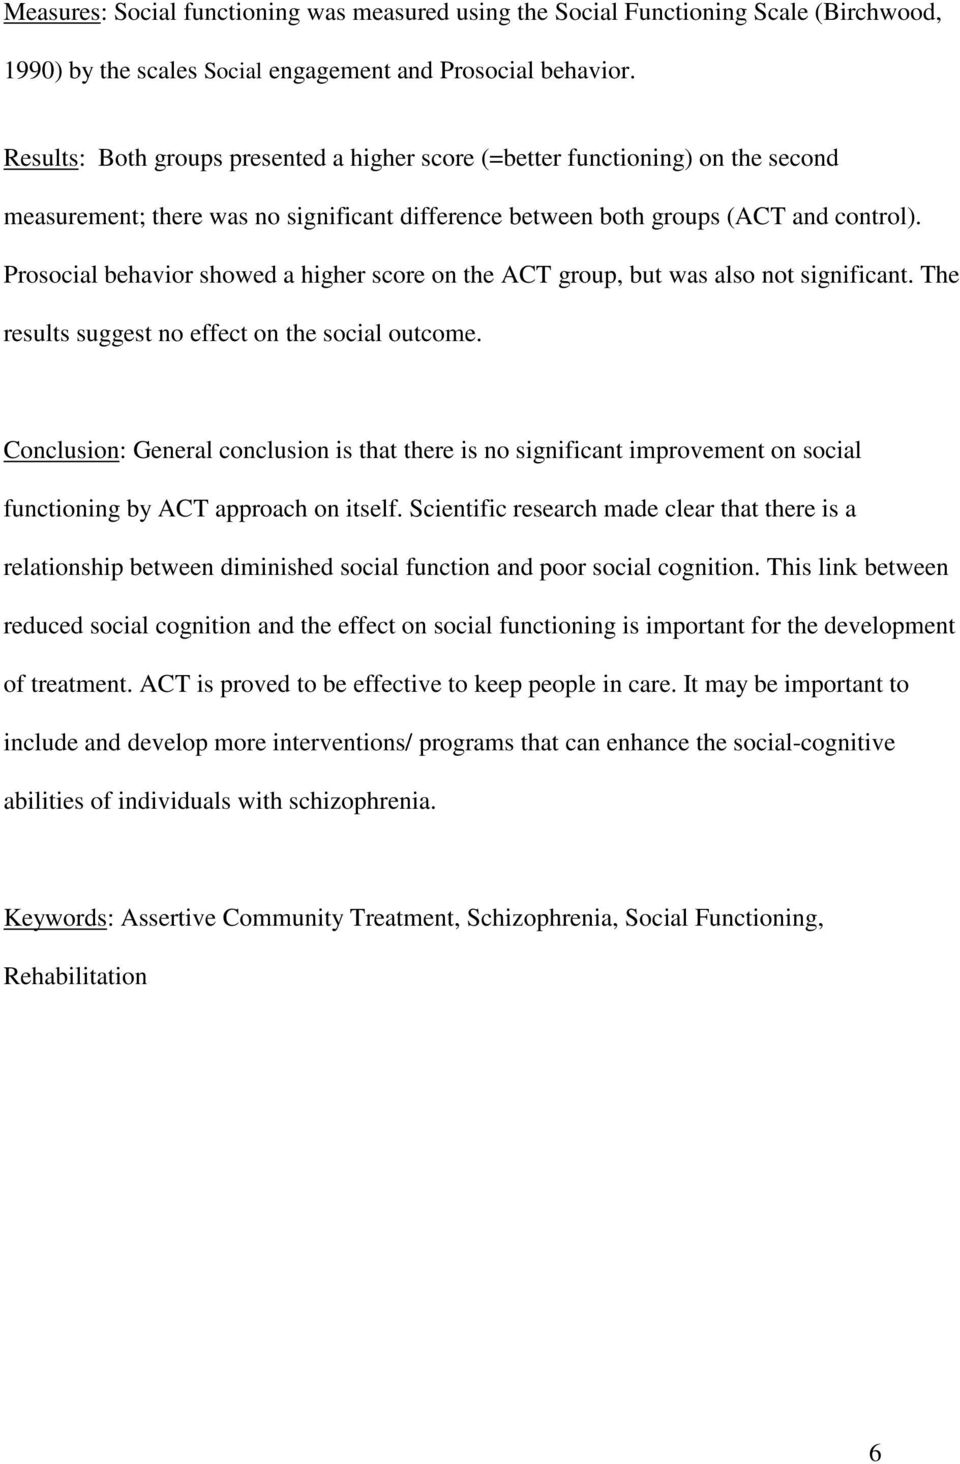 Prosocial behavior showed a higher score on the ACT group, but was also not significant. The results suggest no effect on the social outcome.